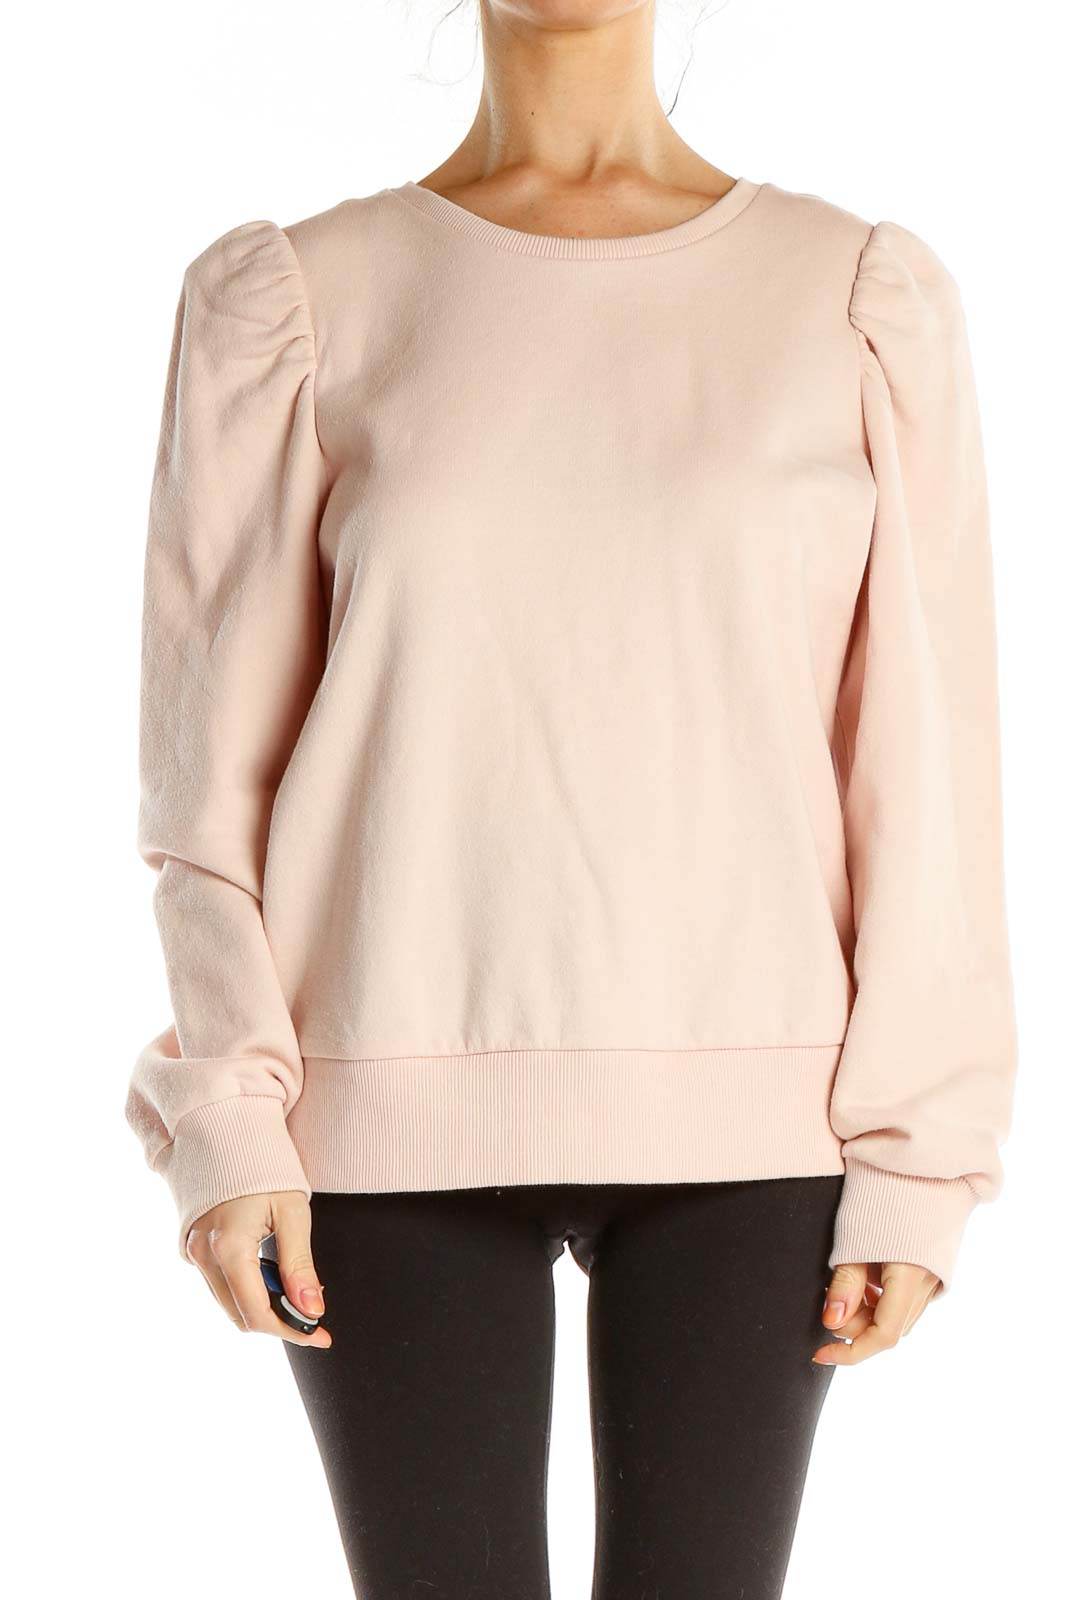 Pink Chic Sweater Front